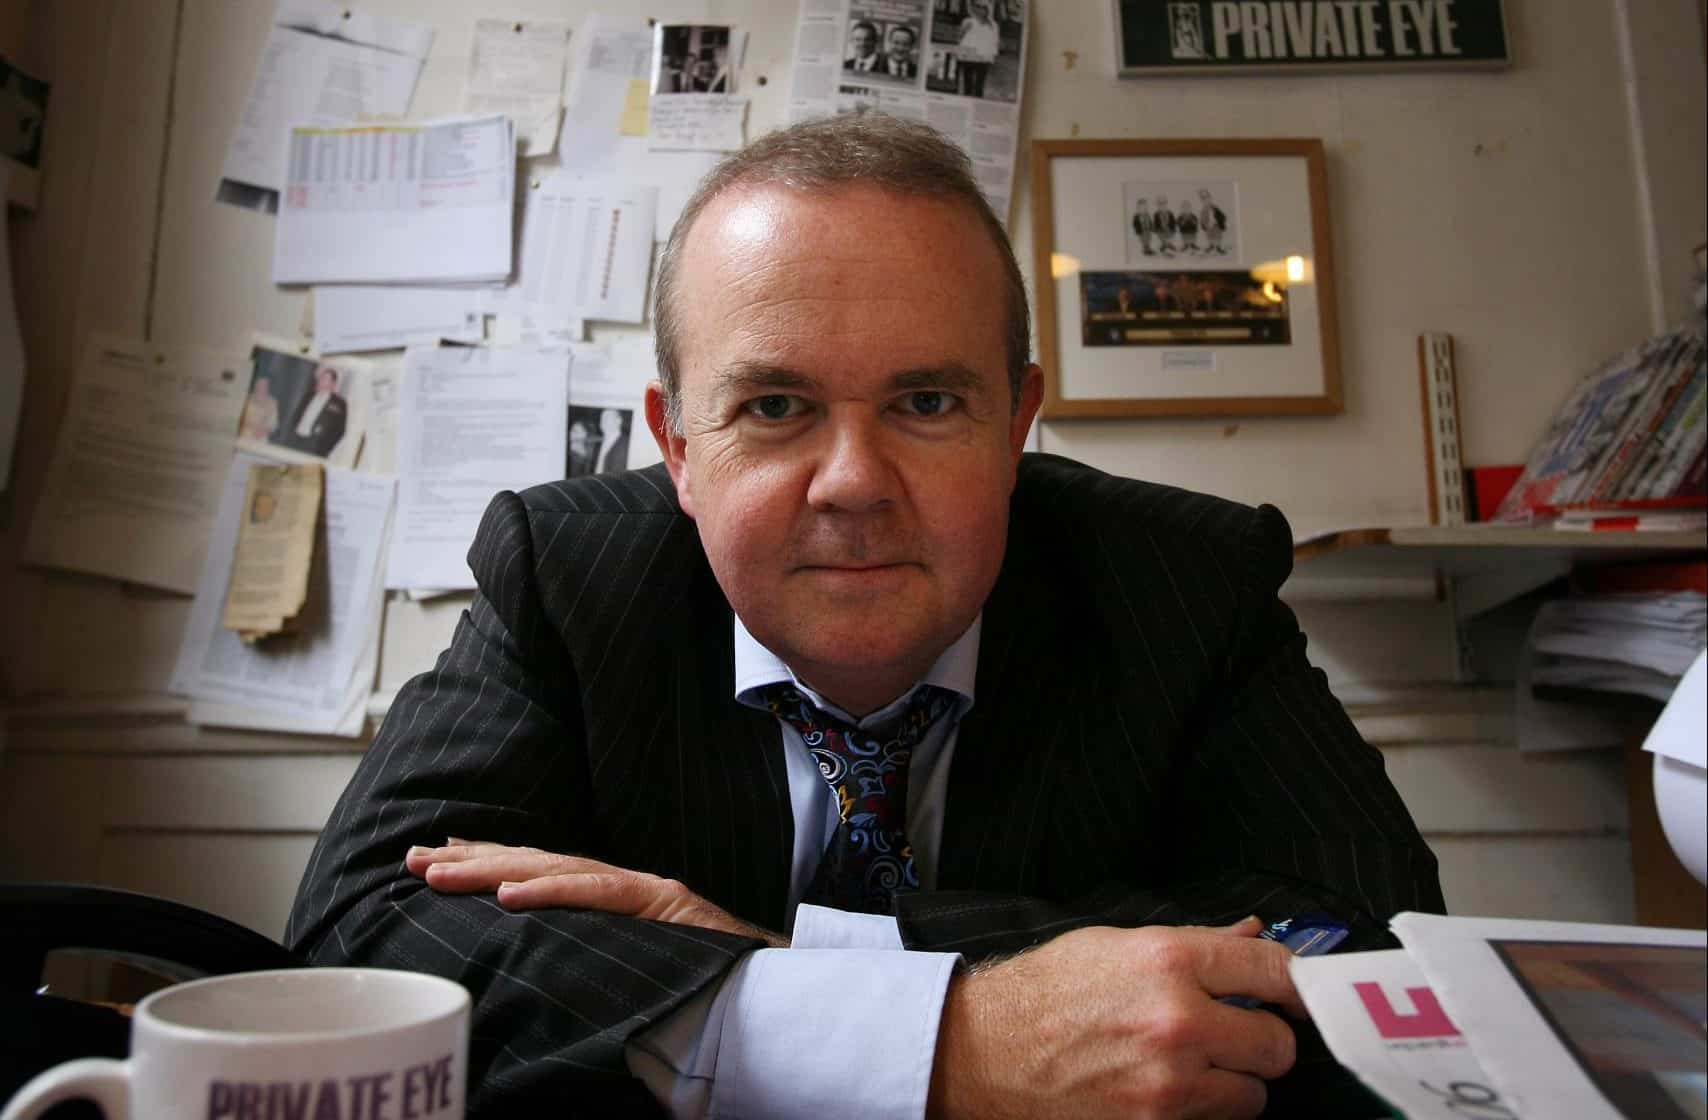 ‘They should be ashamed’: Ian Hislop’s must-watch Paterson monologue